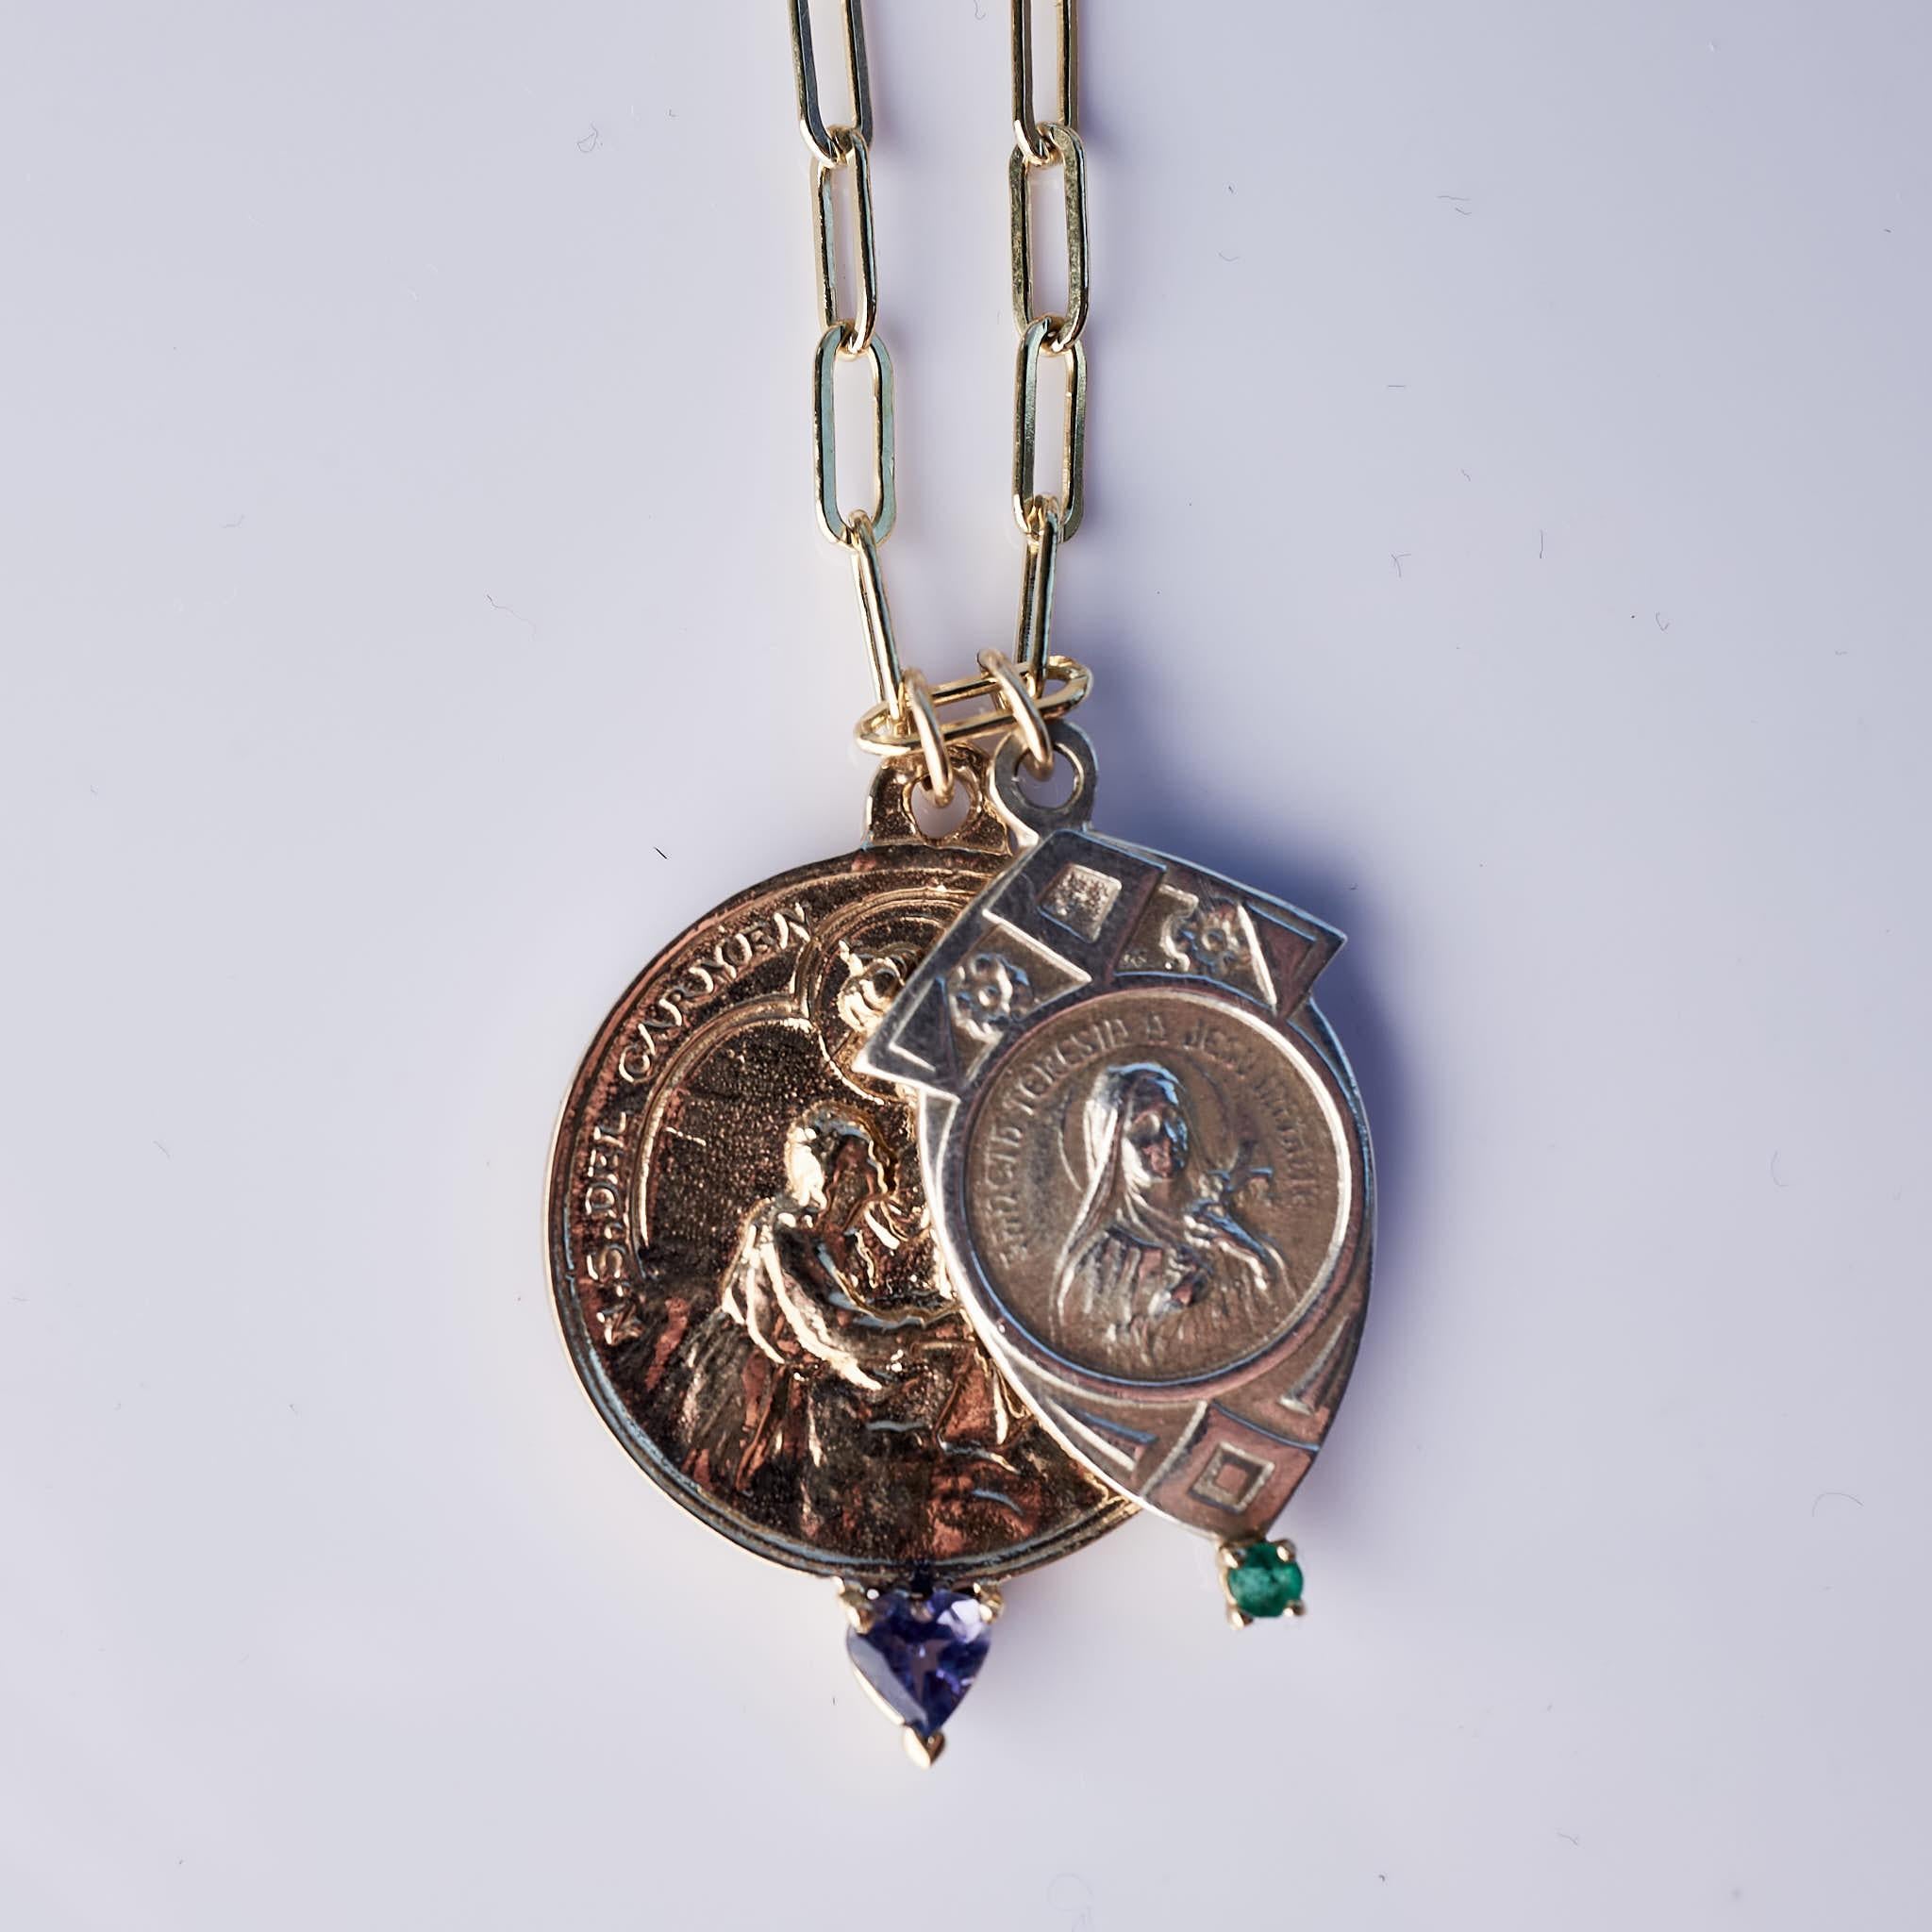 Emerald Medal Chain Necklace Virgin Mary Heart Tanzanite Silver Bronze J Dauphin

This Double Medal Necklace with two Virgin Mary Medals hangs on a Gold Filled Chain. One of the medals is round in bronze and has a gold set Heart Tanzanite, the other